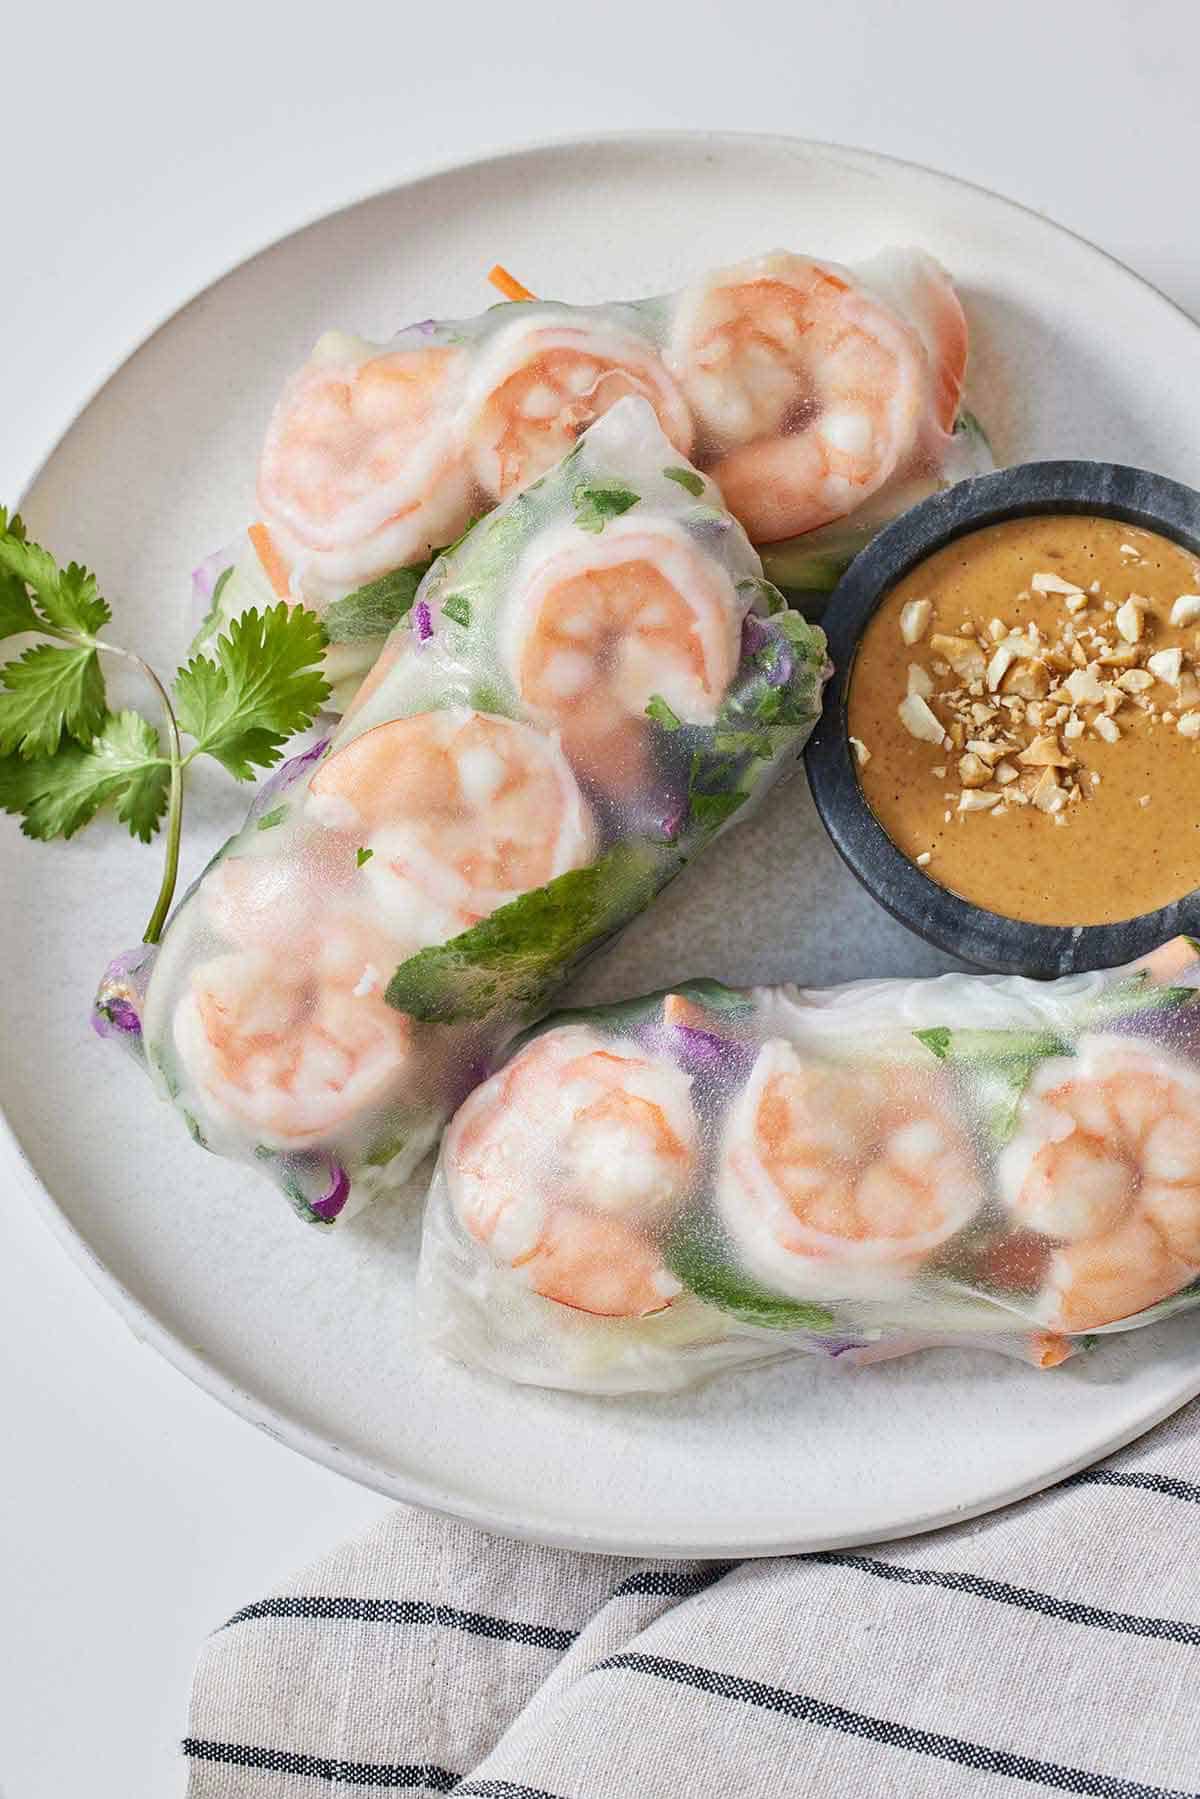 A plate with three salad rolls with a peanut dip on the side.